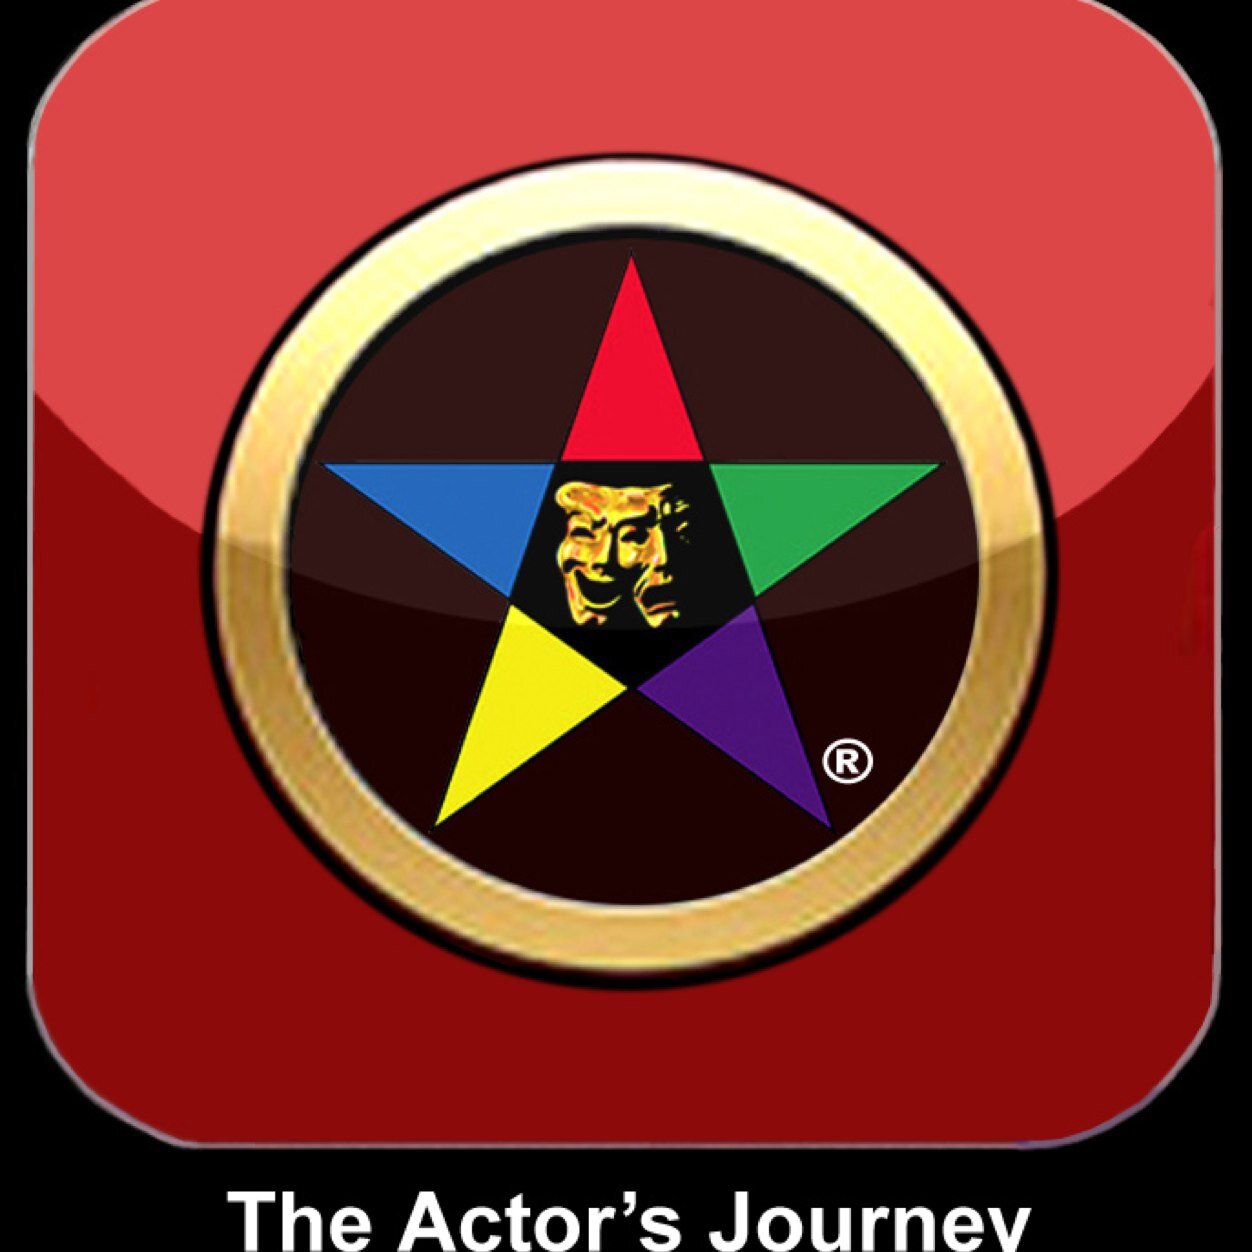 A REVOLUTIONARY DVD PROGRAM for ACTORS.  100 Distinguished Industry Pros teach the BUSINESS & CAREER DEVELOPMENT SKILLS required to advance and sustain careers.